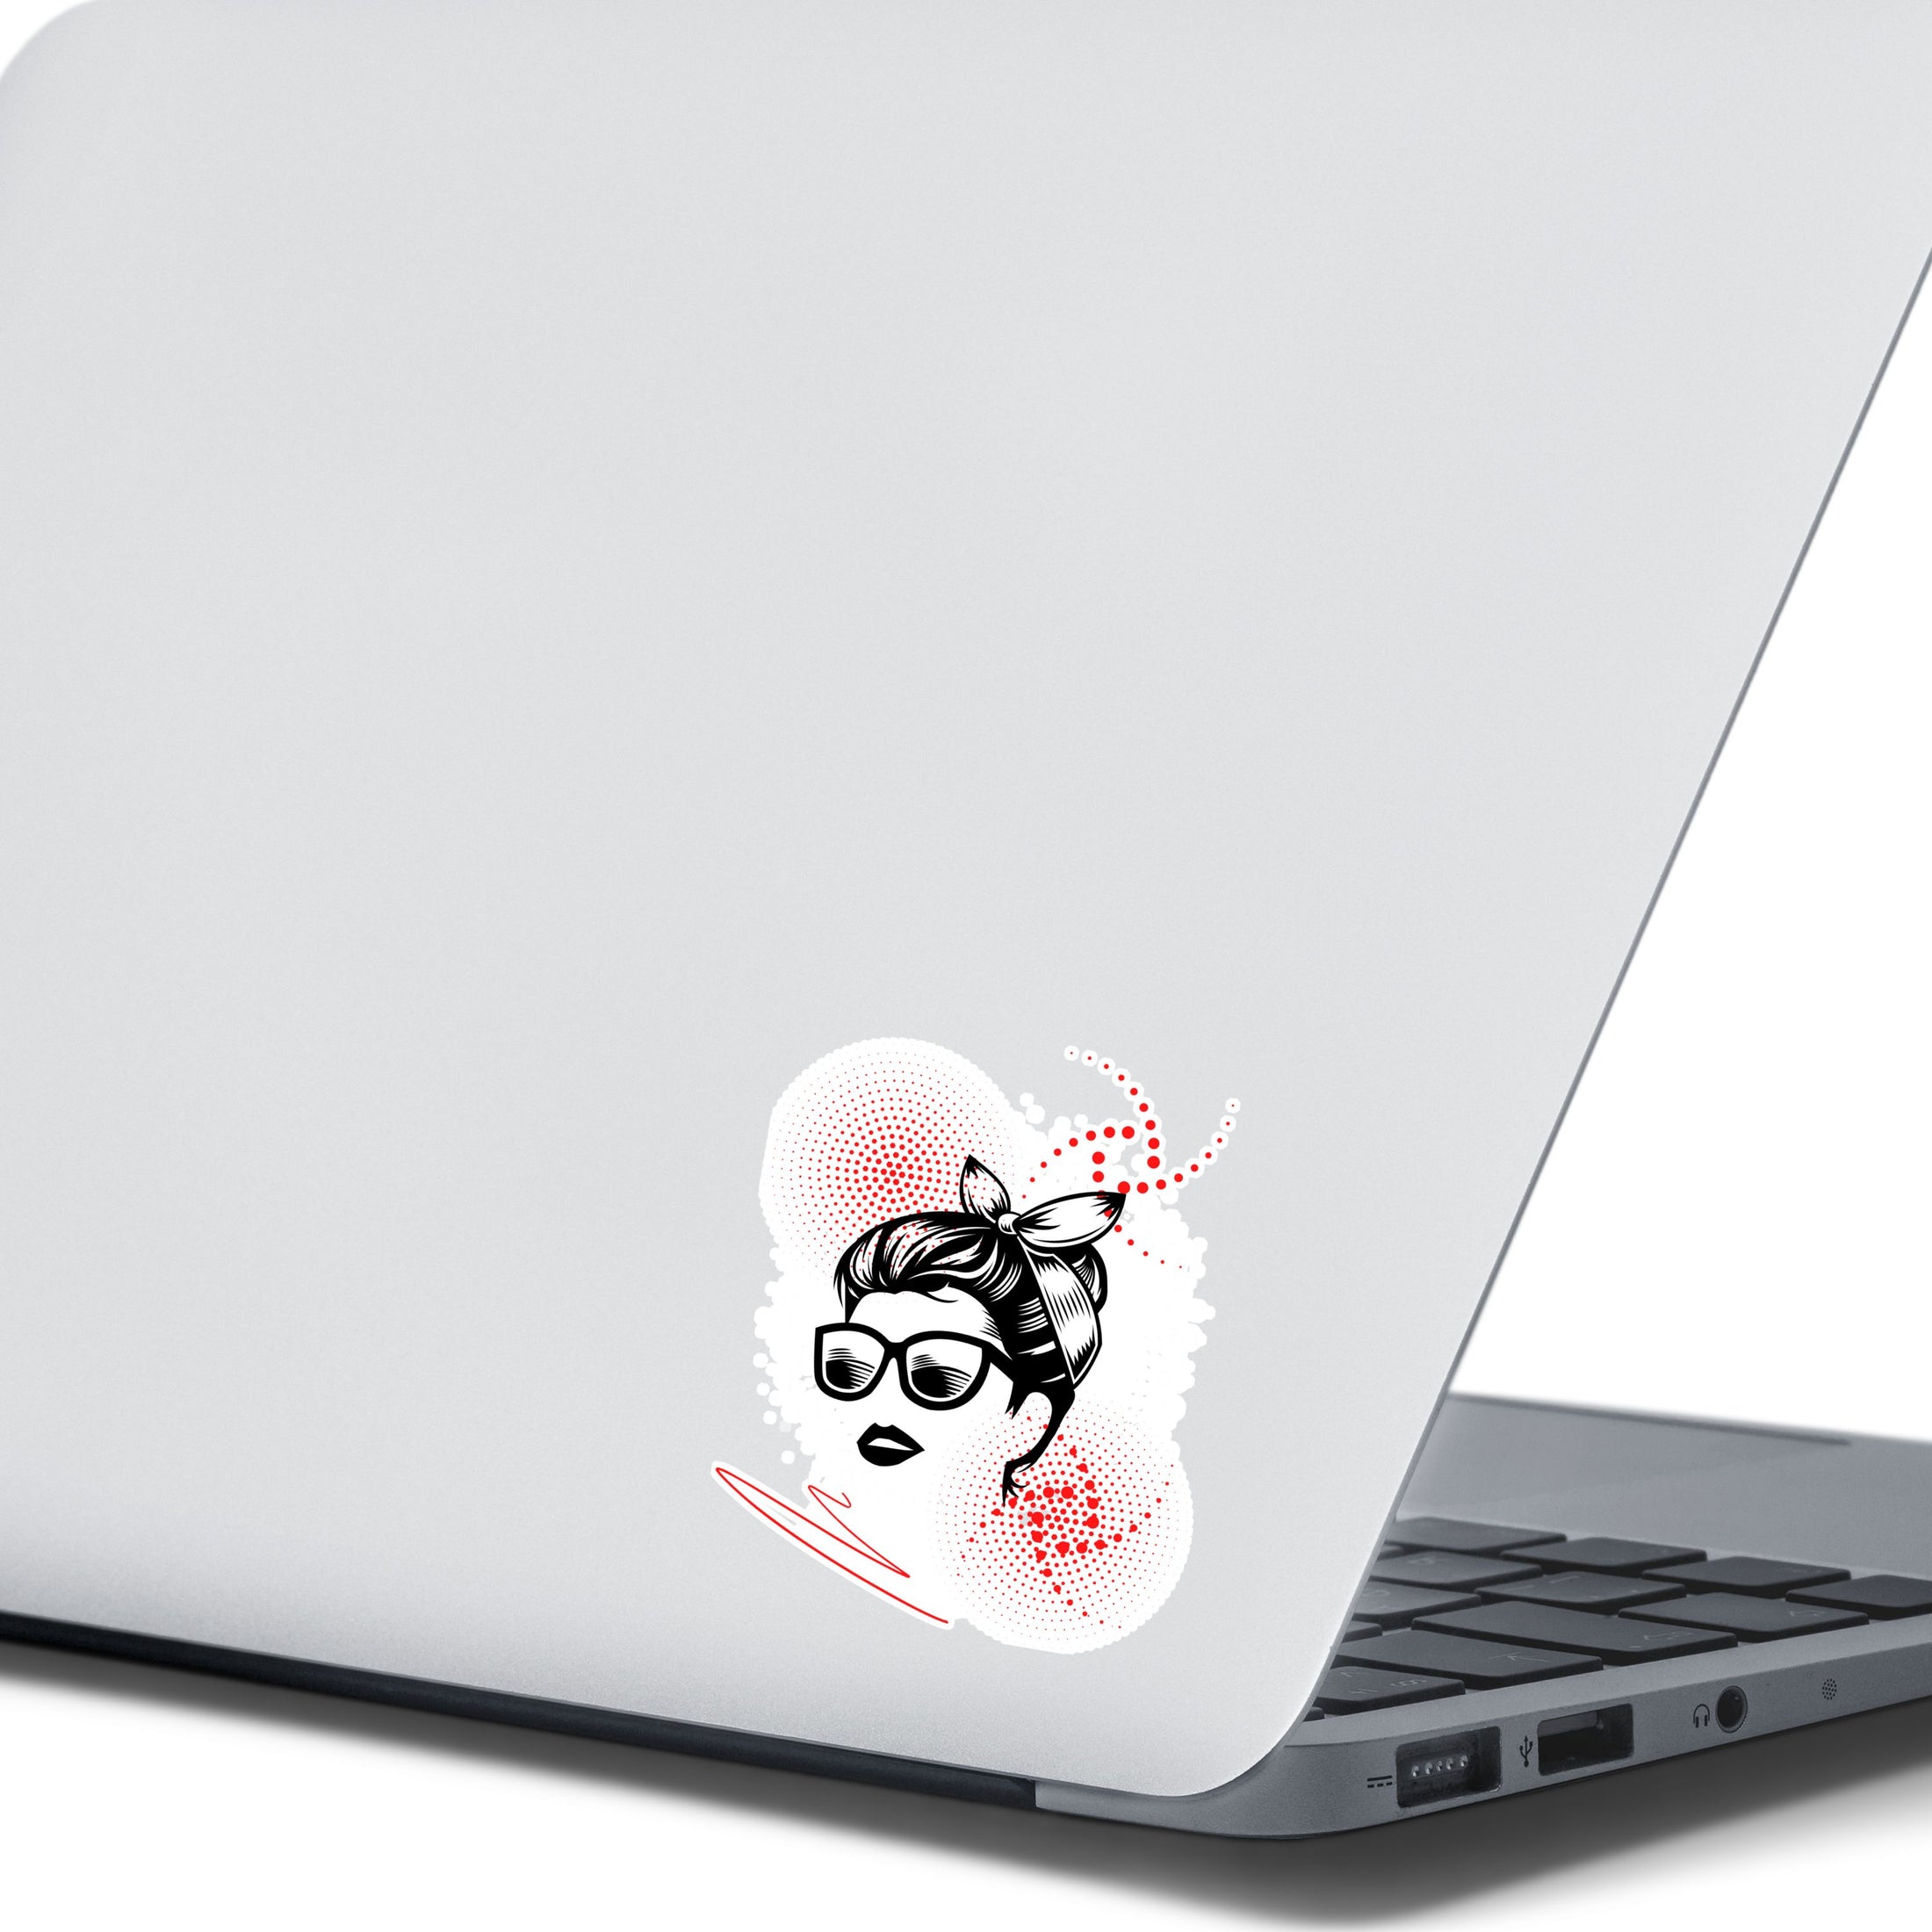 Trash Polka uses red, black, and white with a combination of abstract, surrealistic, and realistic images, and this individual die-cut sticker features a woman wearing sunglasses with her hair tied up on a white background with red swirls. This image shows the trash polka woman sticker on the back of an open laptop.